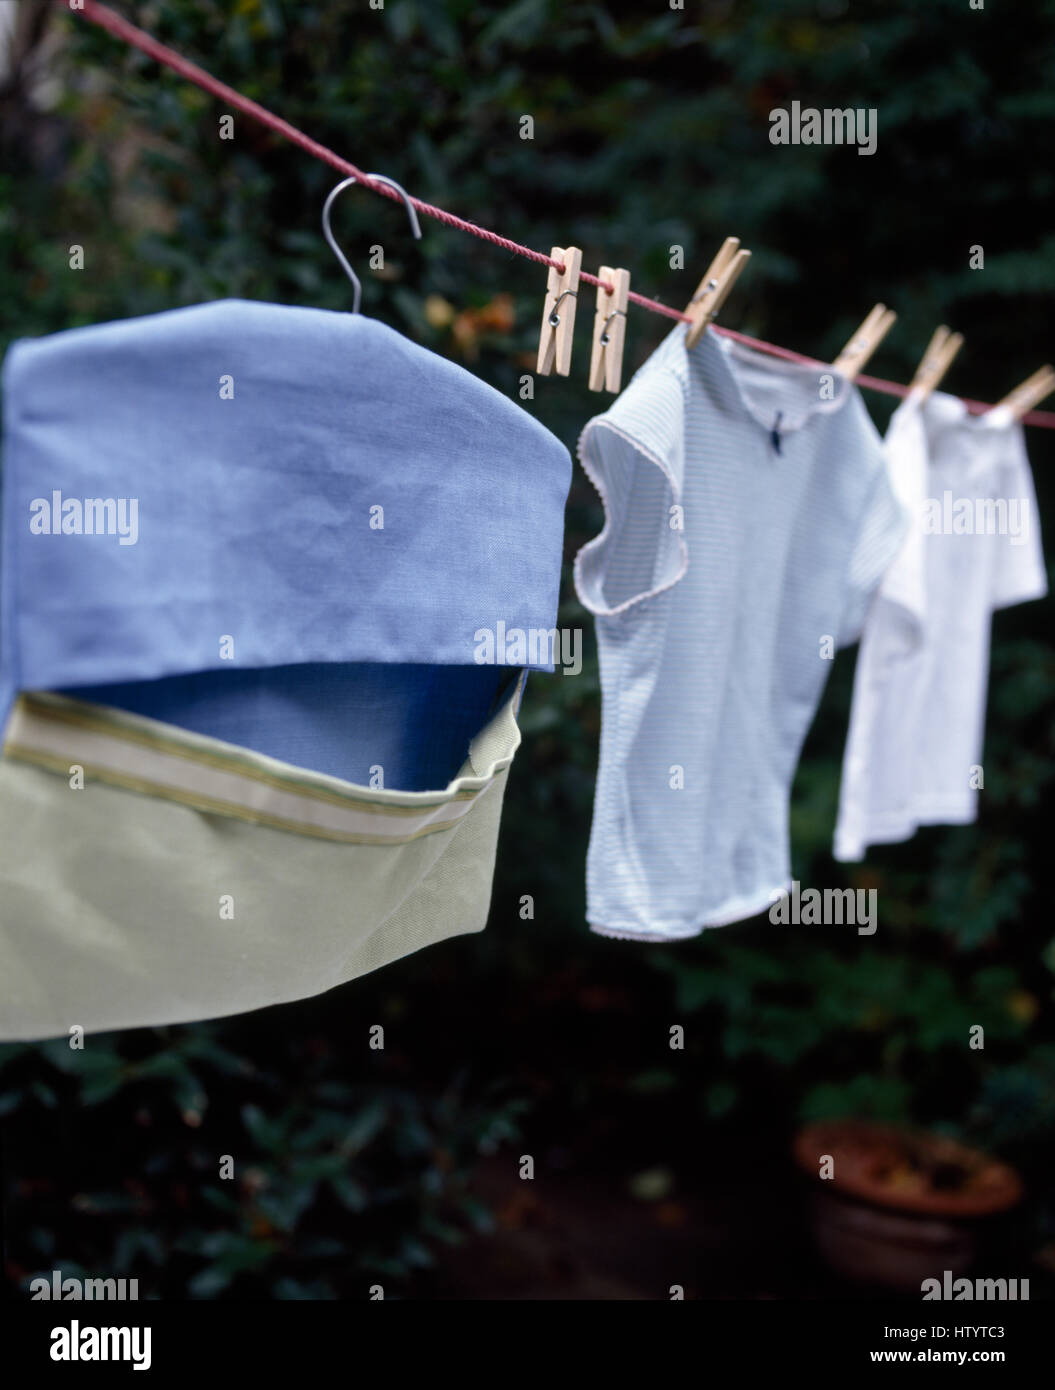 Close-up of a home made peg bag on a washing line with tee shirts Stock Photo